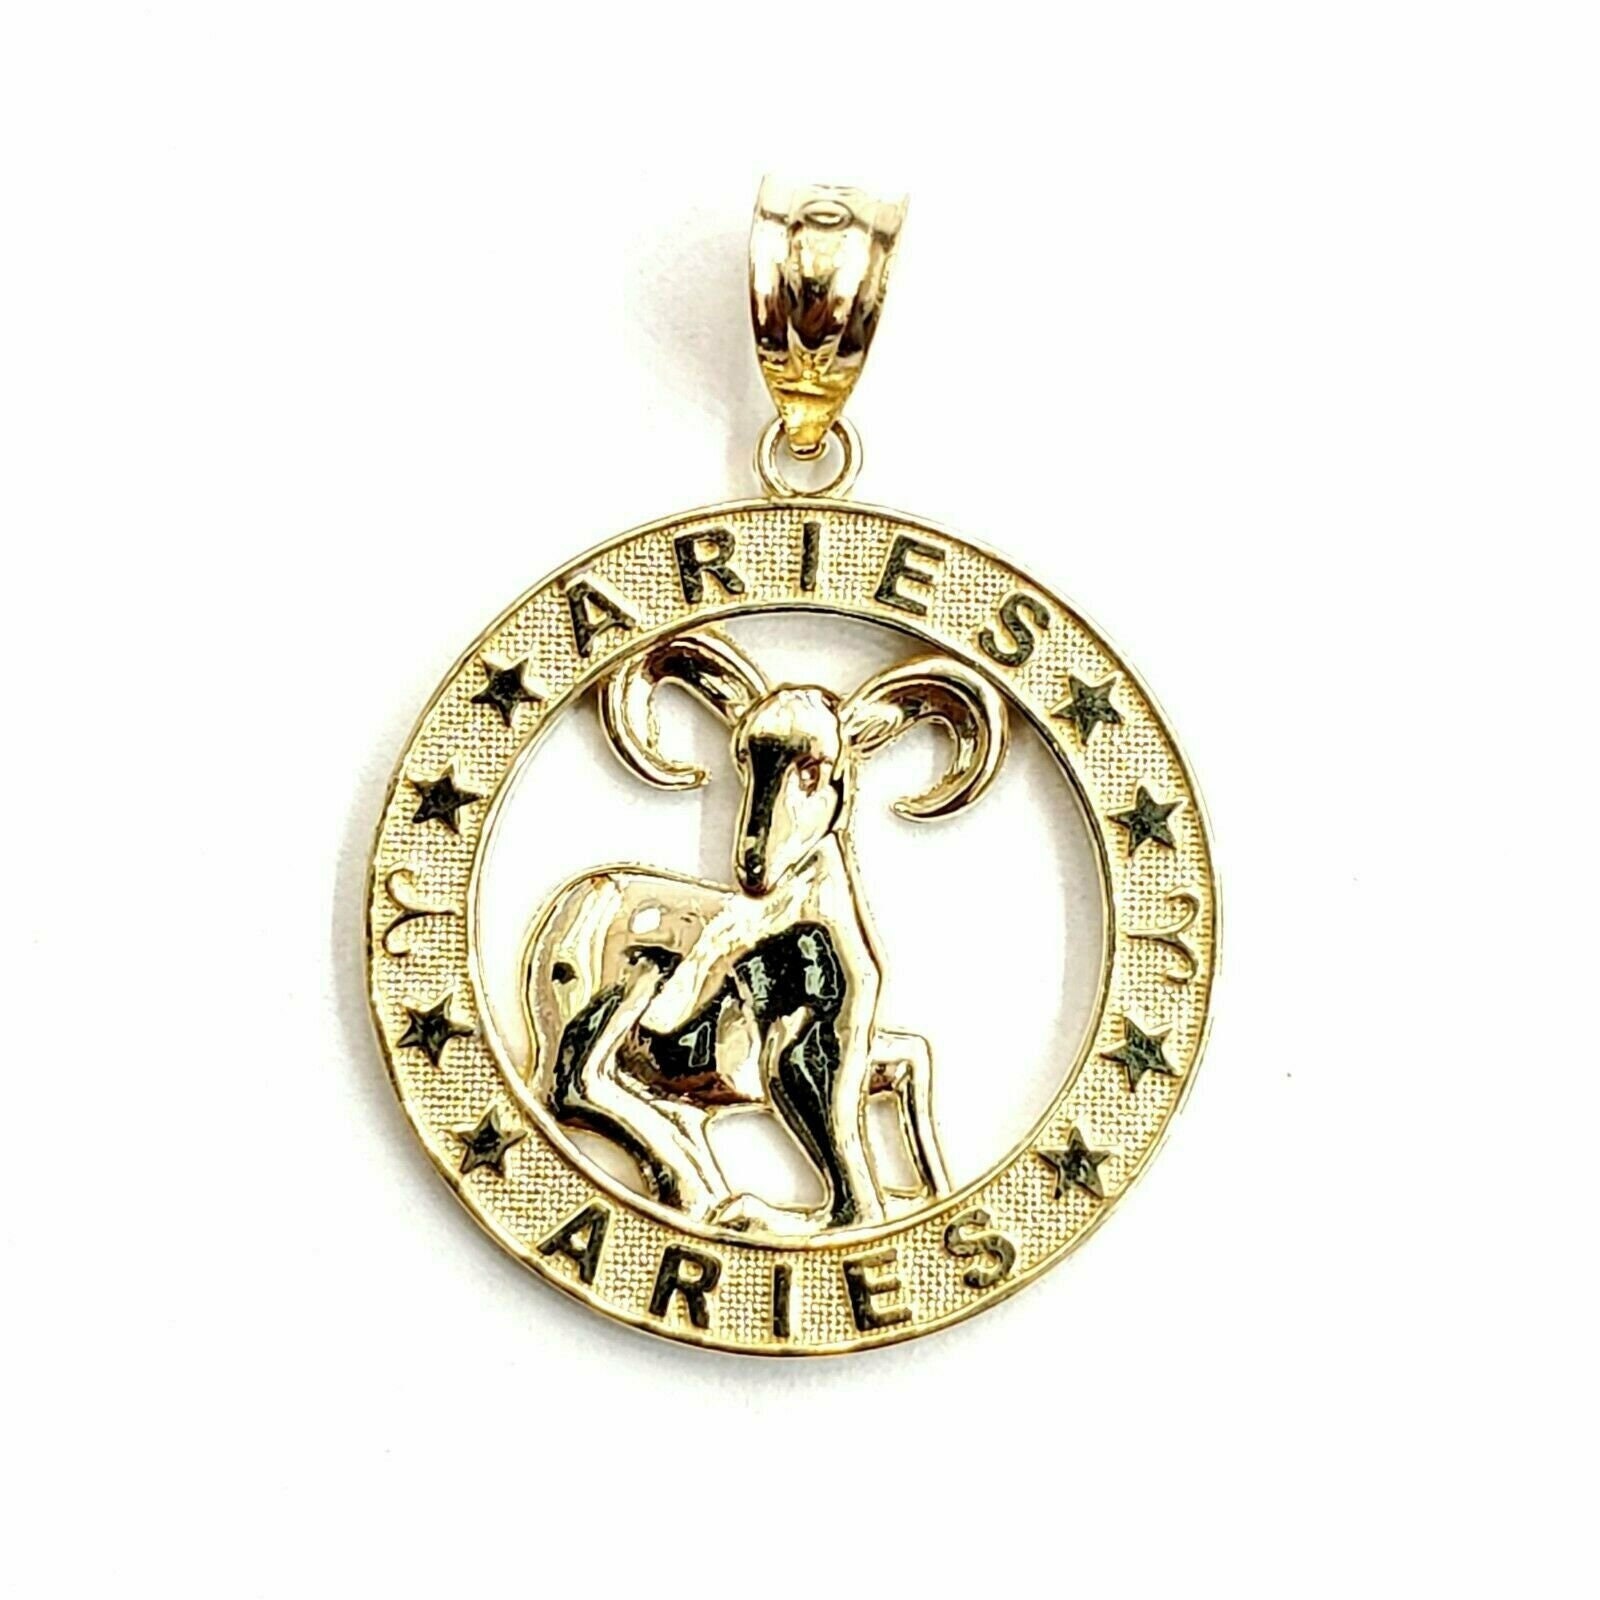 Double Facette Gold Zodiac Charms, Reversible Astrology Charms, Zodiac  Necklace Charms,12 Zodiac Charms for Jewelry Making Supply, ZODIAC-22 